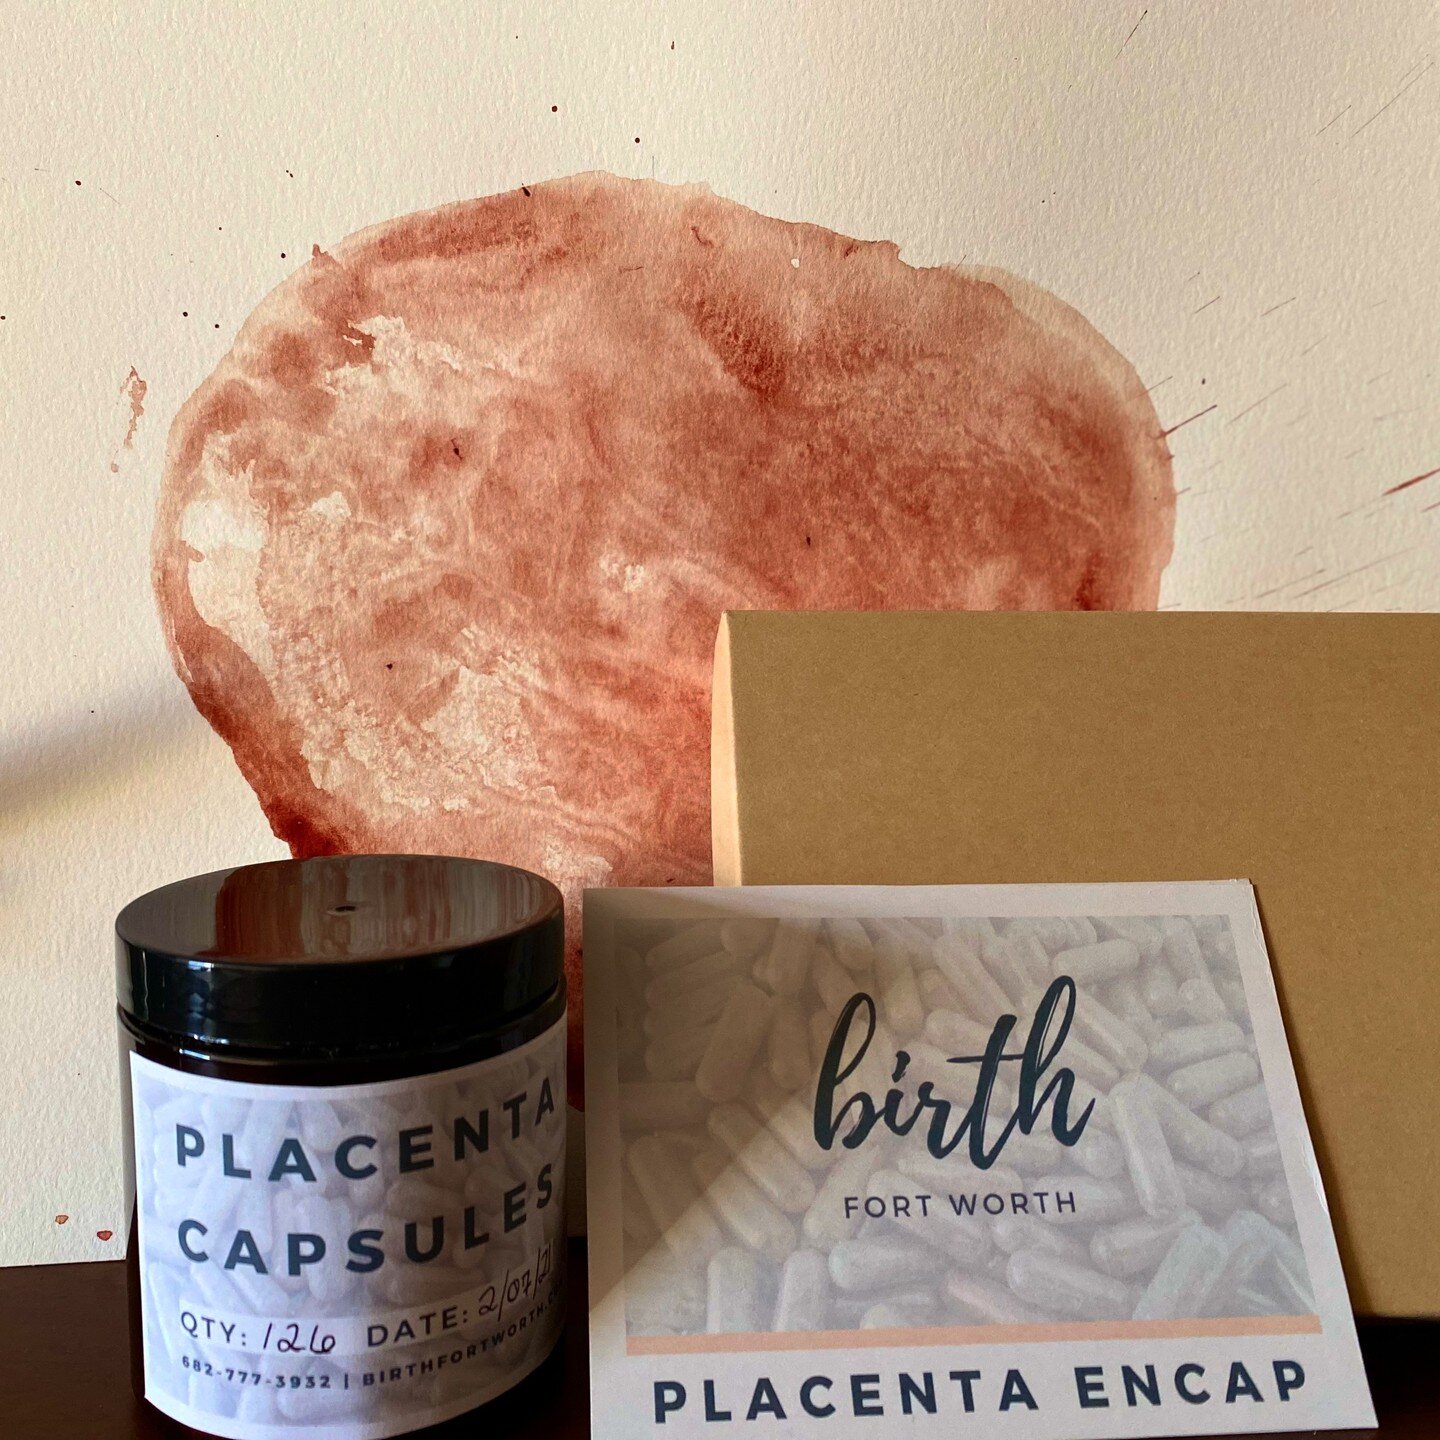 I was so excited that I was able to encapsulate a placenta with @birth_fort_worth and can't believe I got so many capsules!!

#placenta #placentaencapsulation #doula #queerdoula 

Image Description:This is a picture of placenta capsules in a plastic 